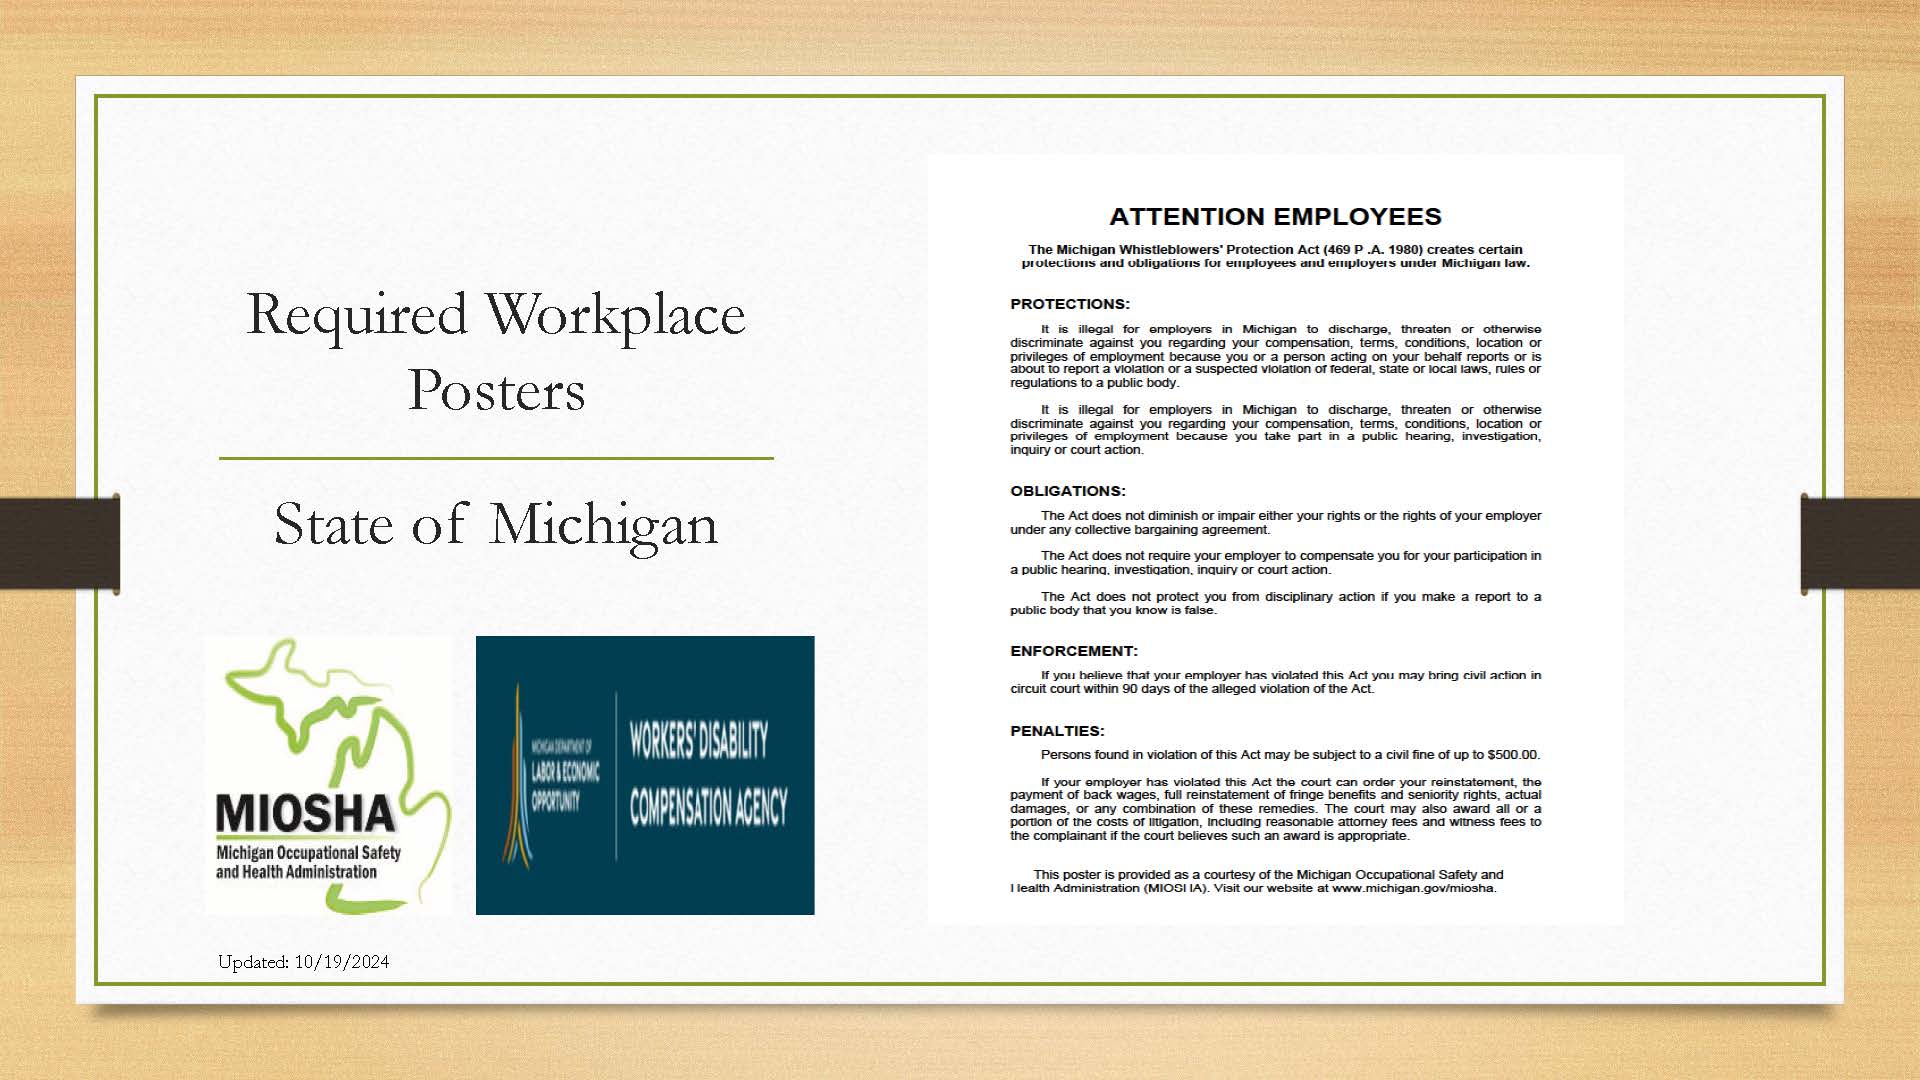 Michigan Whistleblowers Protection Act poster